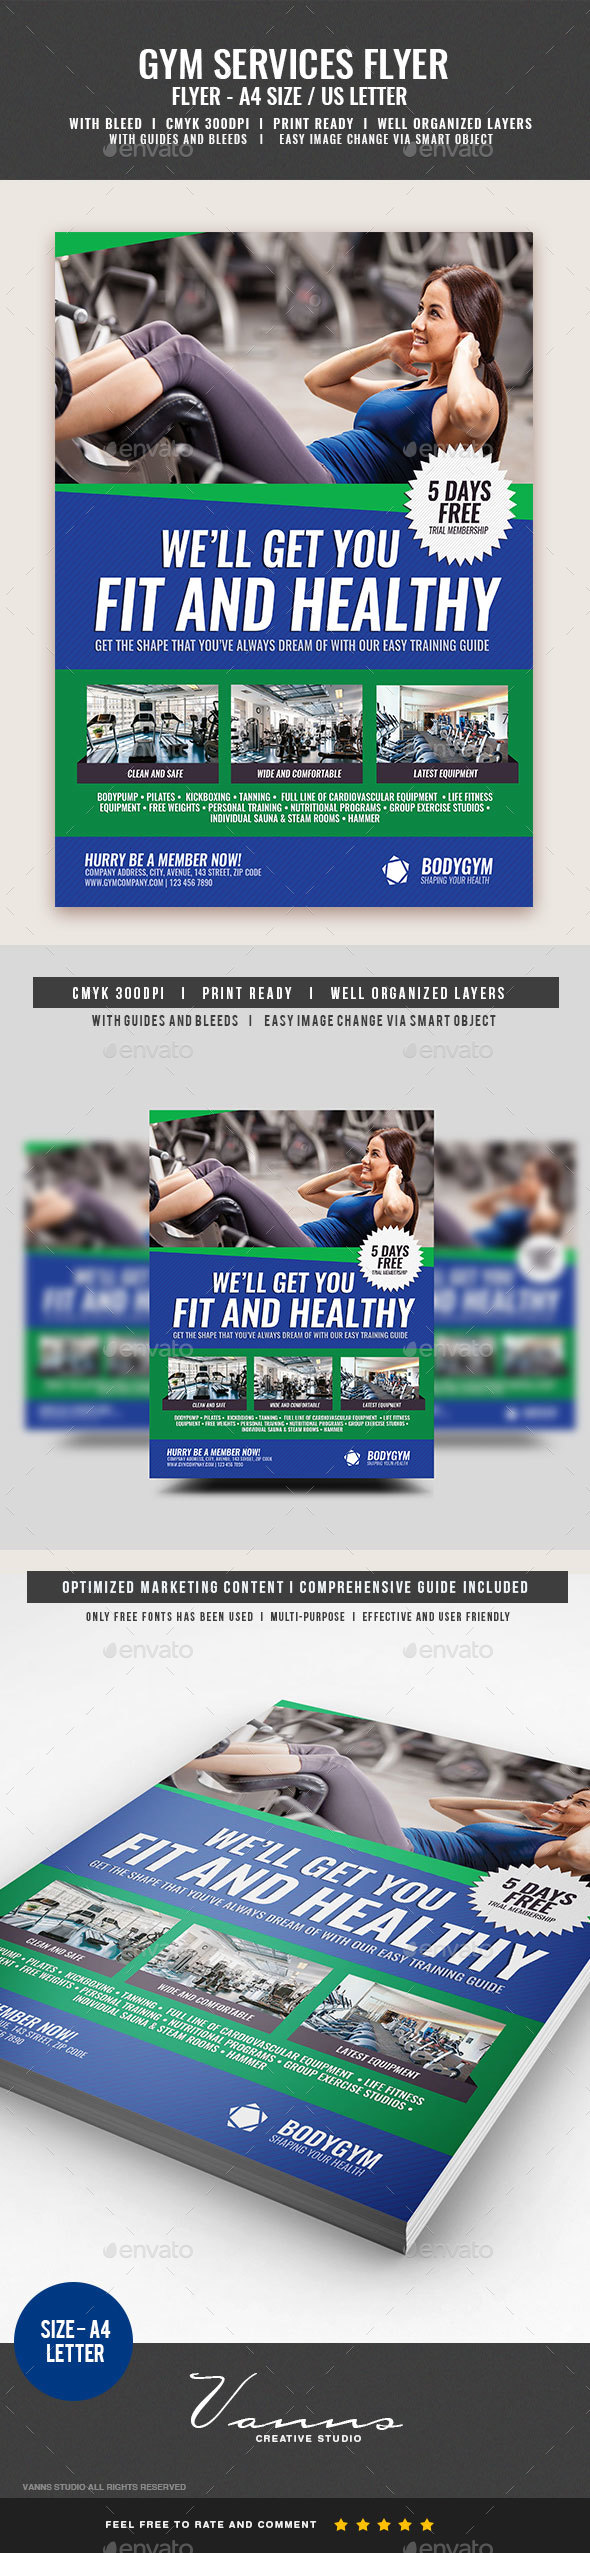 Gym Workout Services Flyer